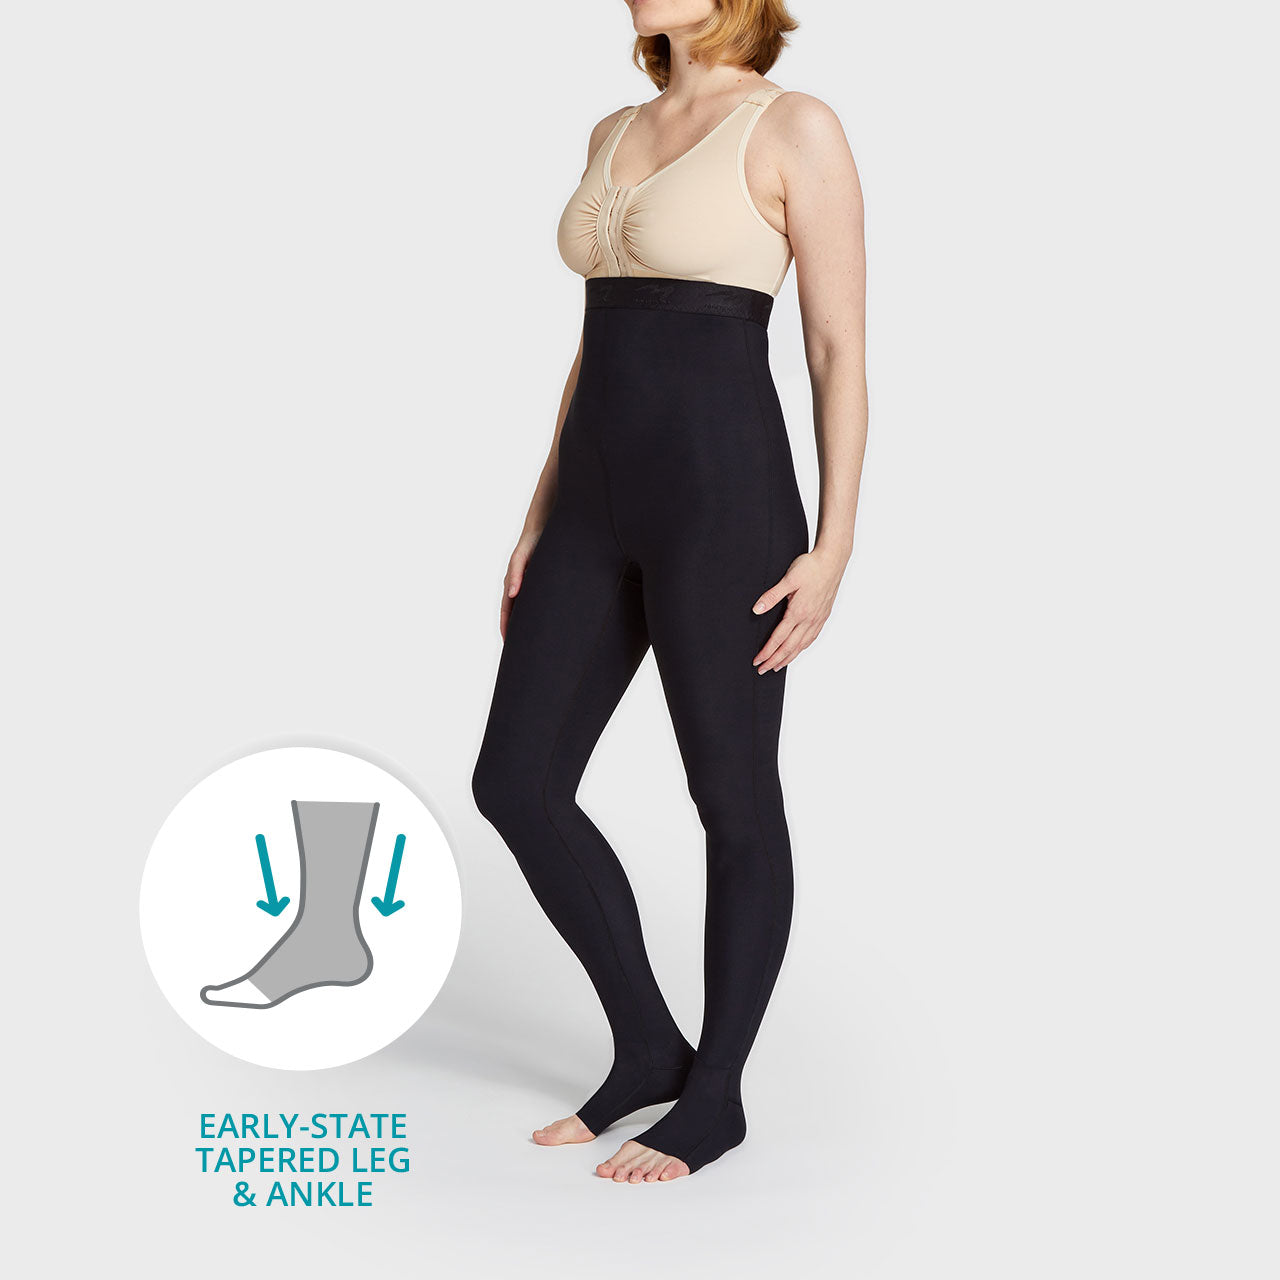 Lipedema Early-State Everyday Management Legging with FlexFit Comfort Ankle™ | 15-20 mmHg | Style No. LIEMLES